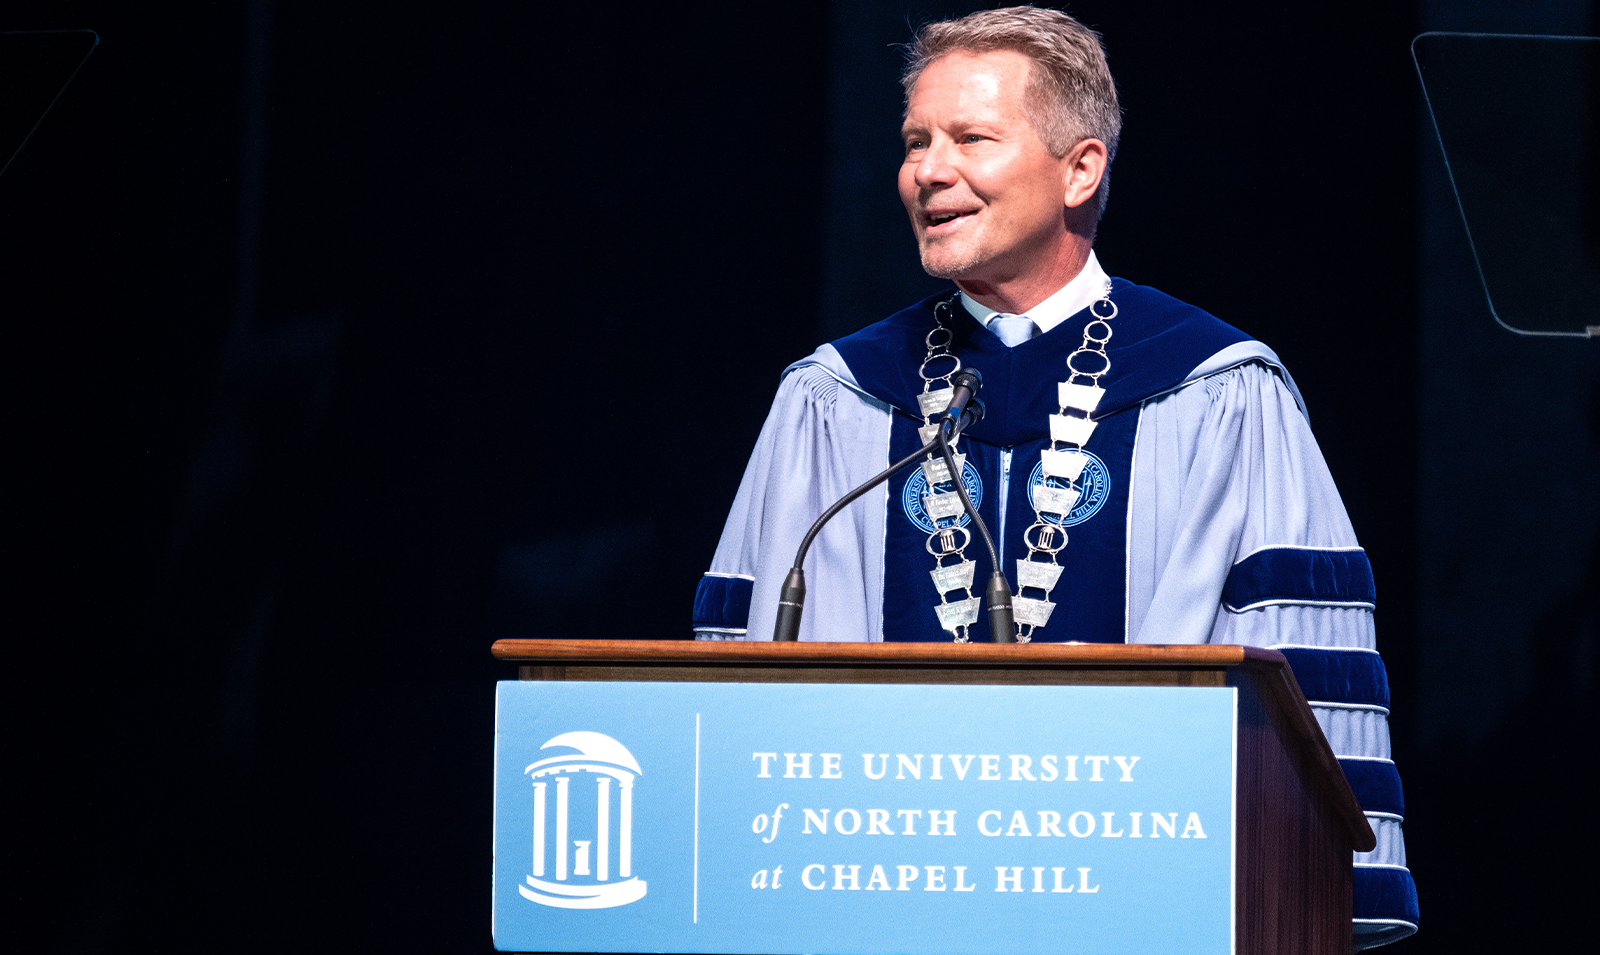 A man, UNC-Chapel Hill Chancellor Kevin M. Guskiewicz, dressed in regalia and speaking at a lectern during a University Day event in an indoor hall.